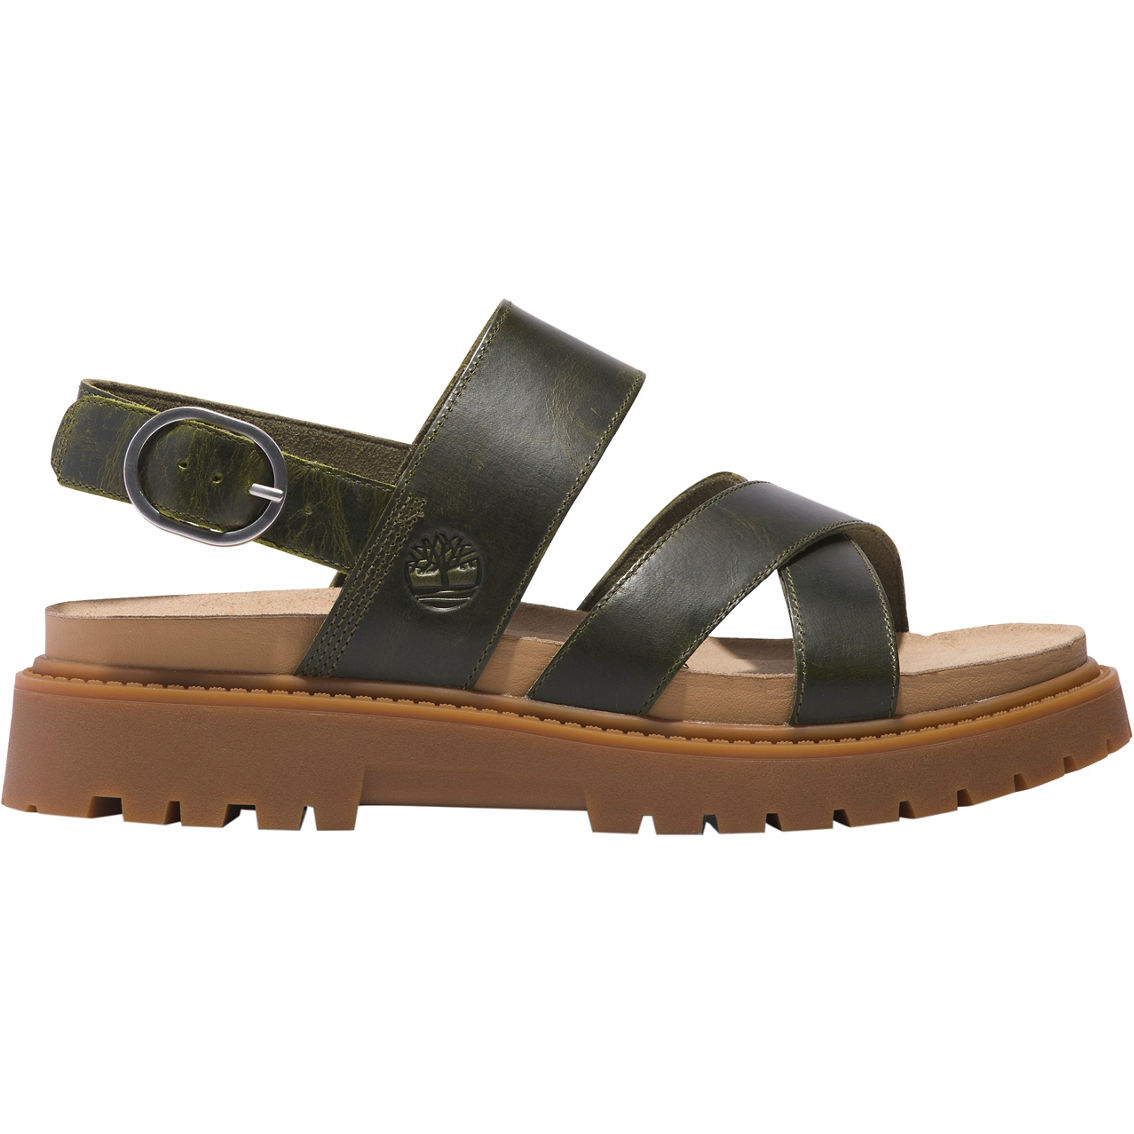 Timberland Women's Clairemont Way Cross Strap Sandals - Image 2 of 4